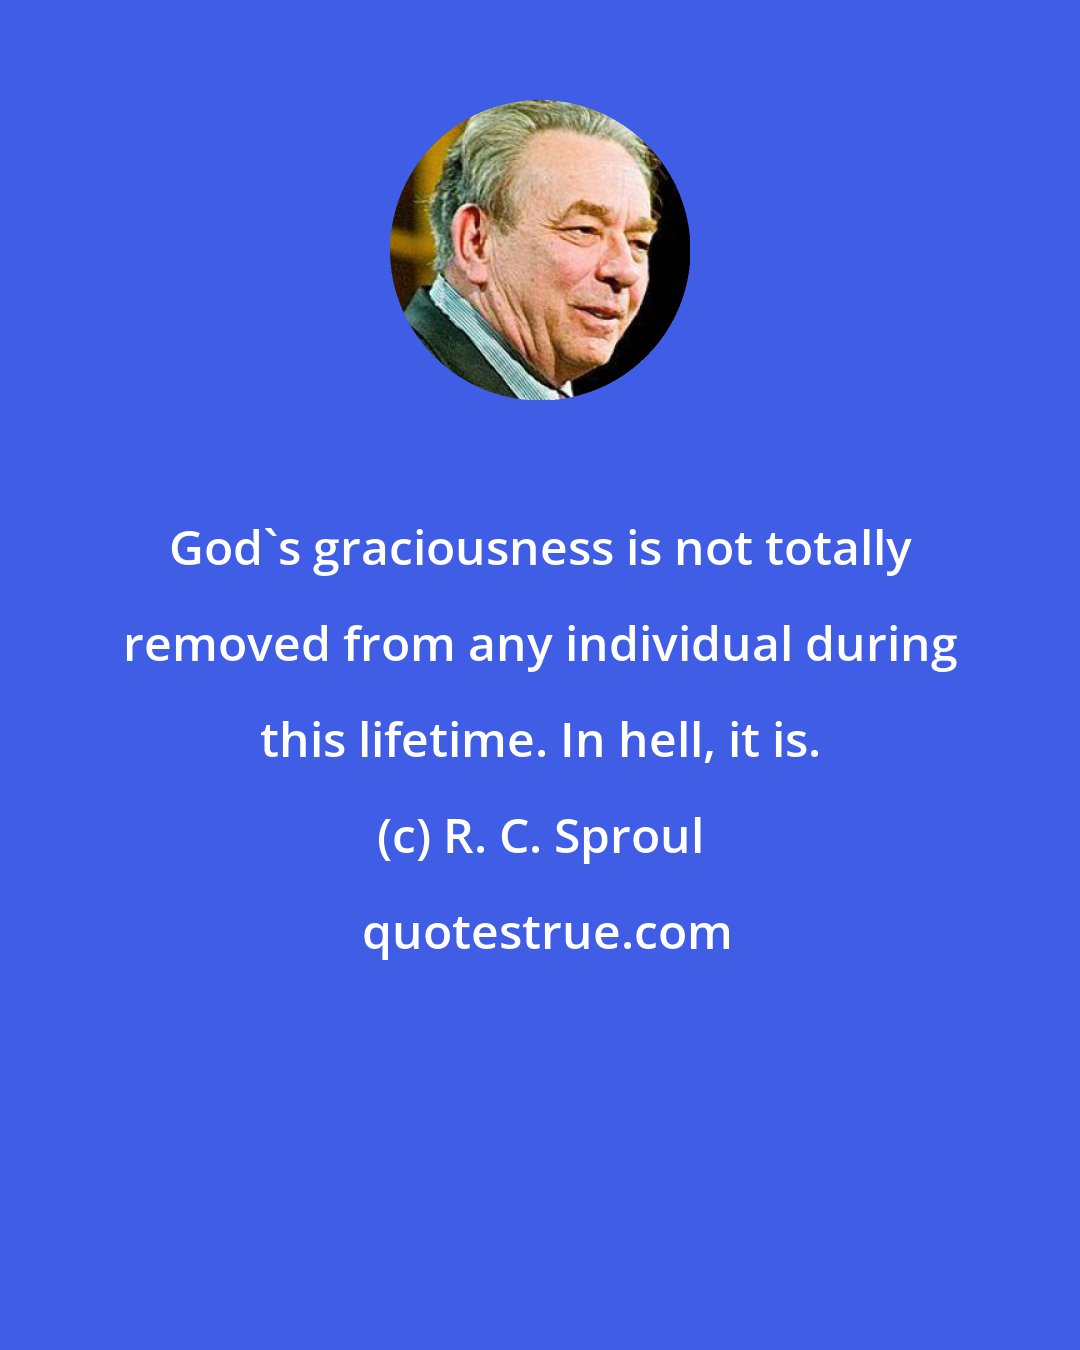 R. C. Sproul: God's graciousness is not totally removed from any individual during this lifetime. In hell, it is.